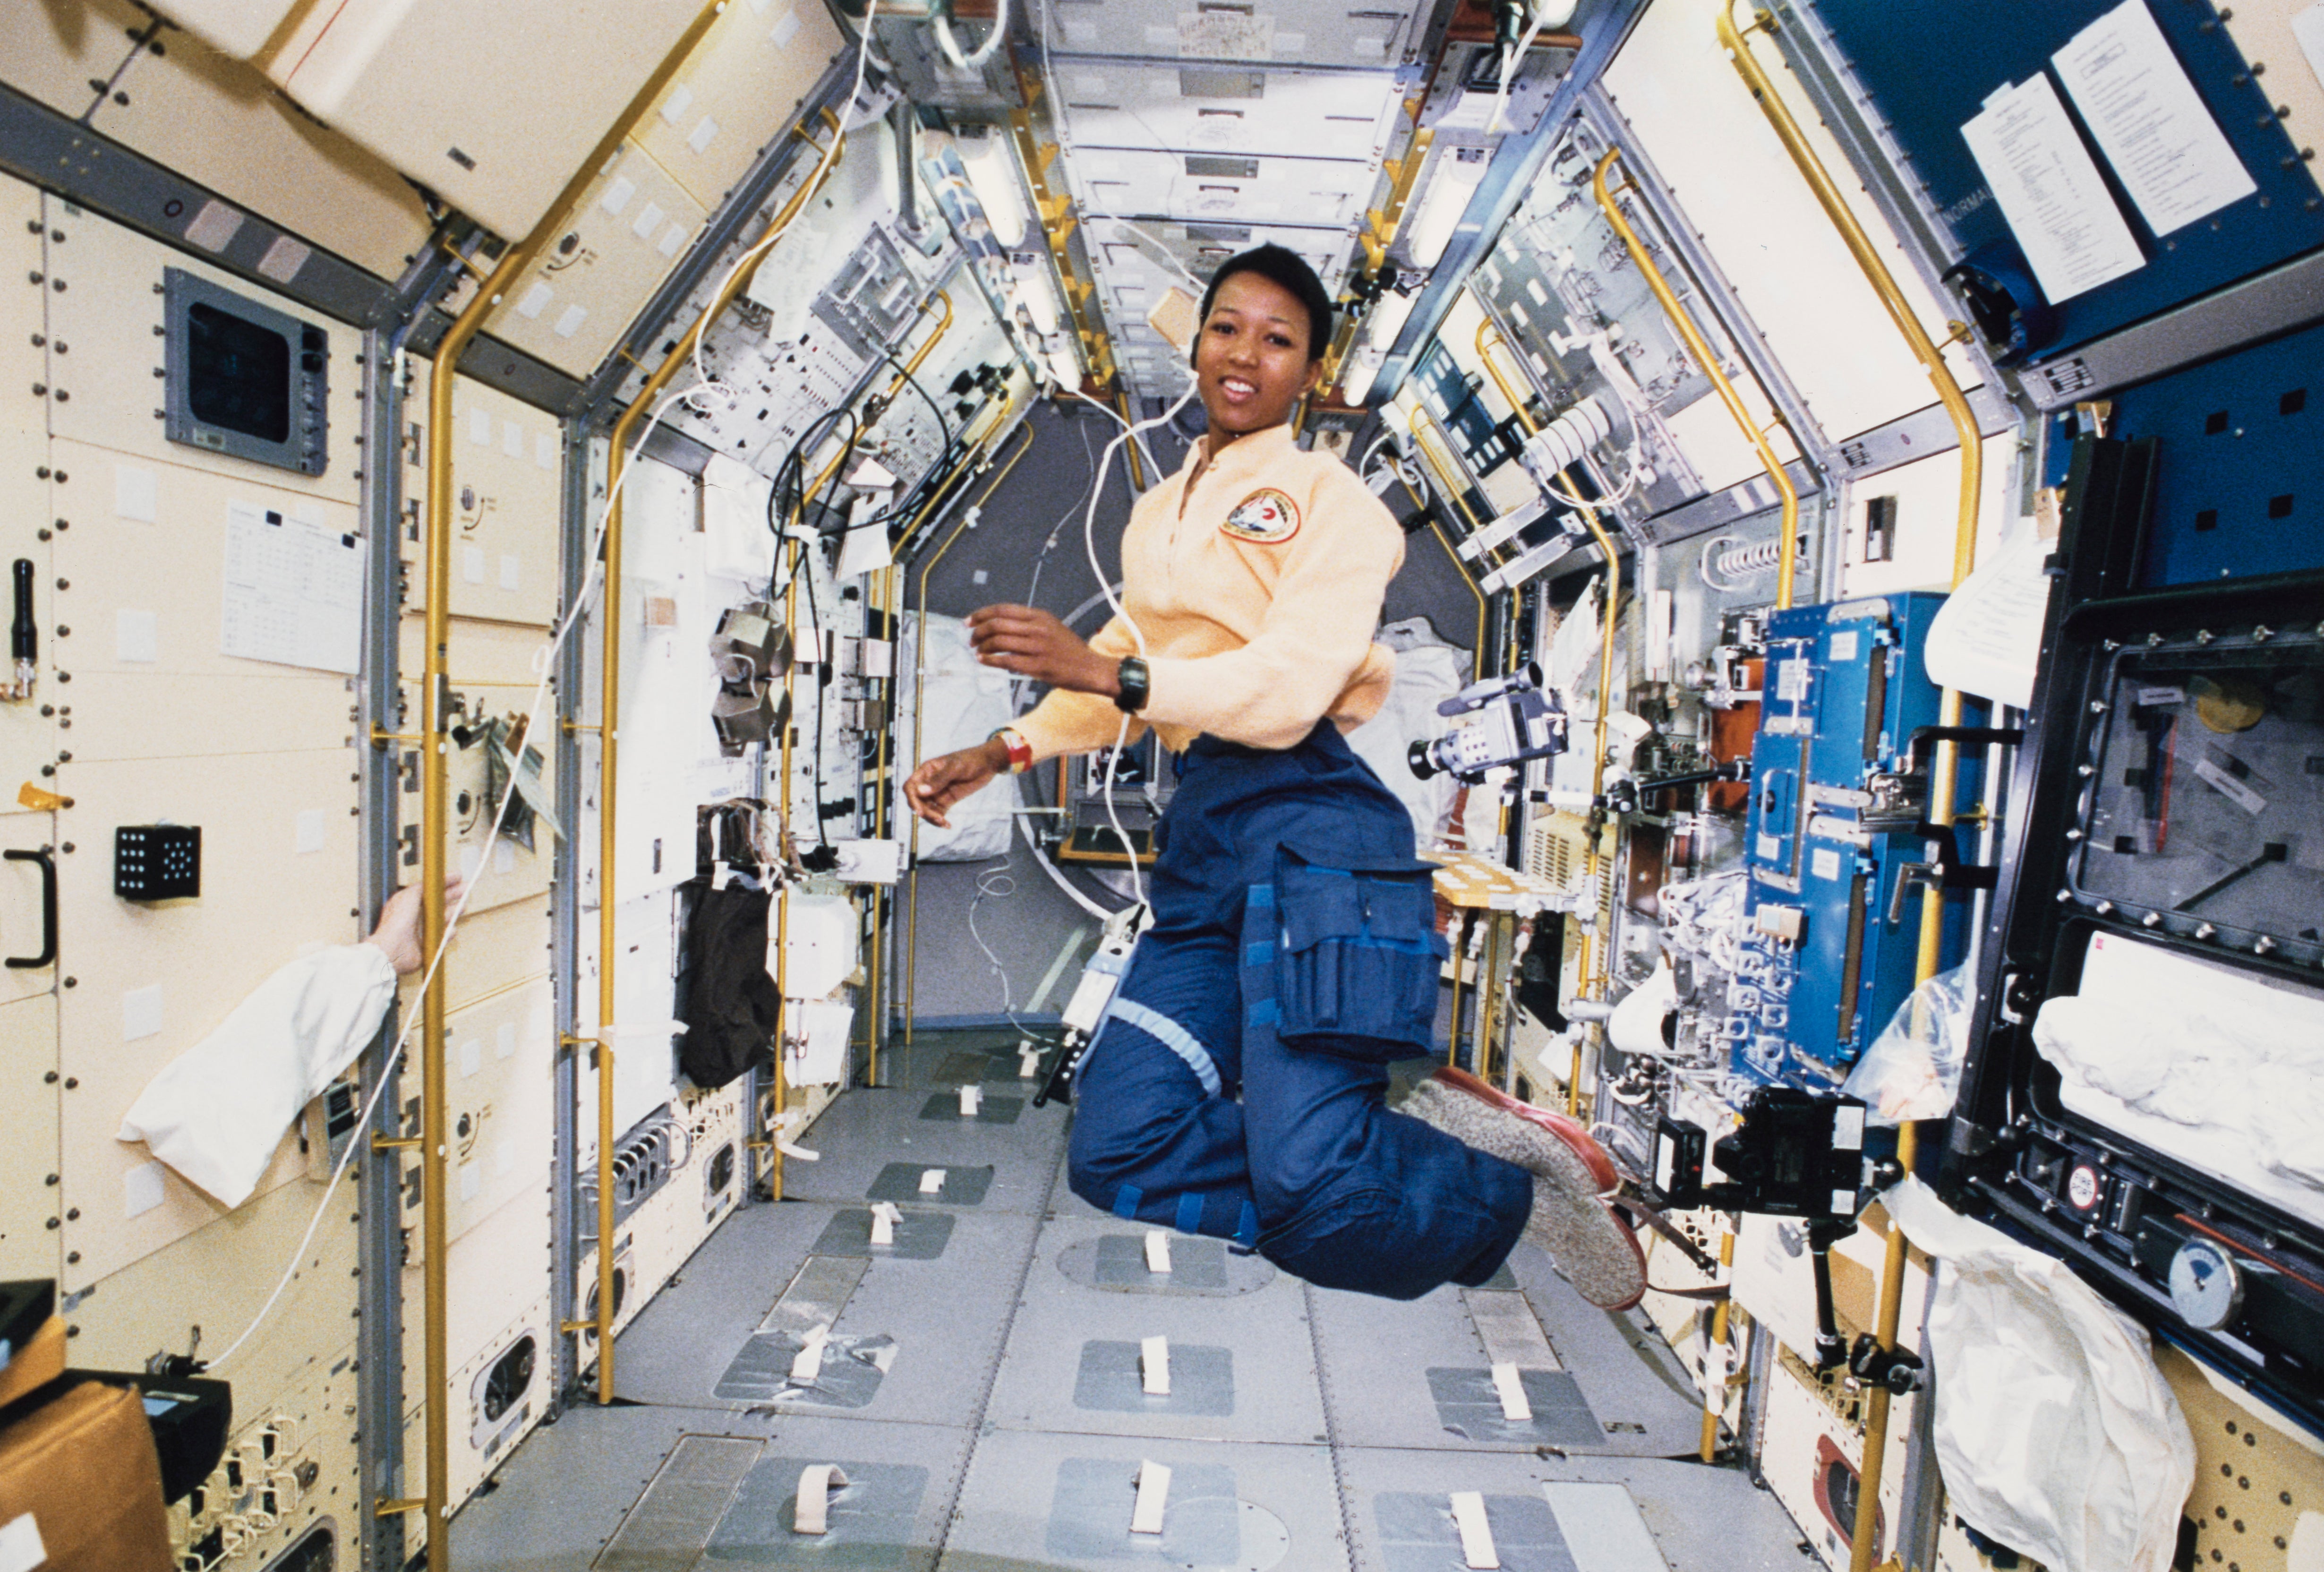 American engineer and astronaut Mae Jemison works in zero gravity in the centre aisle of the Spacelab Japan (SLJ) science module aboard OV-105, the Space Shuttle Endeavour, during NASA’s STS-47 mission, 20th September 1992